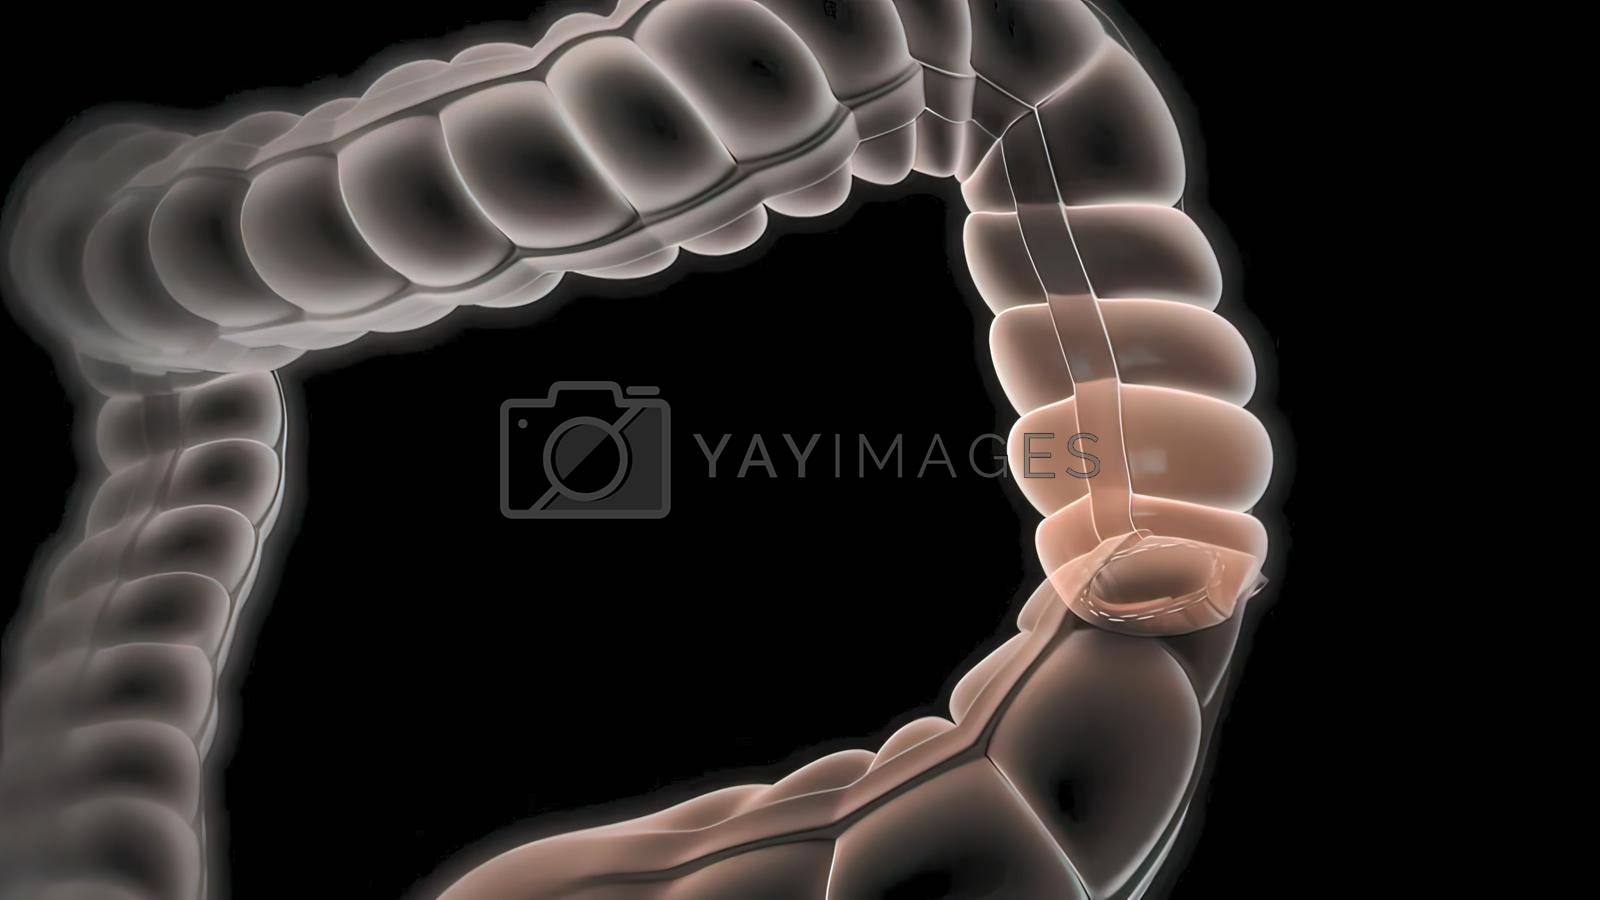 Royalty free image of surgery to remove any part of the intestines, bowel resection by creativepic